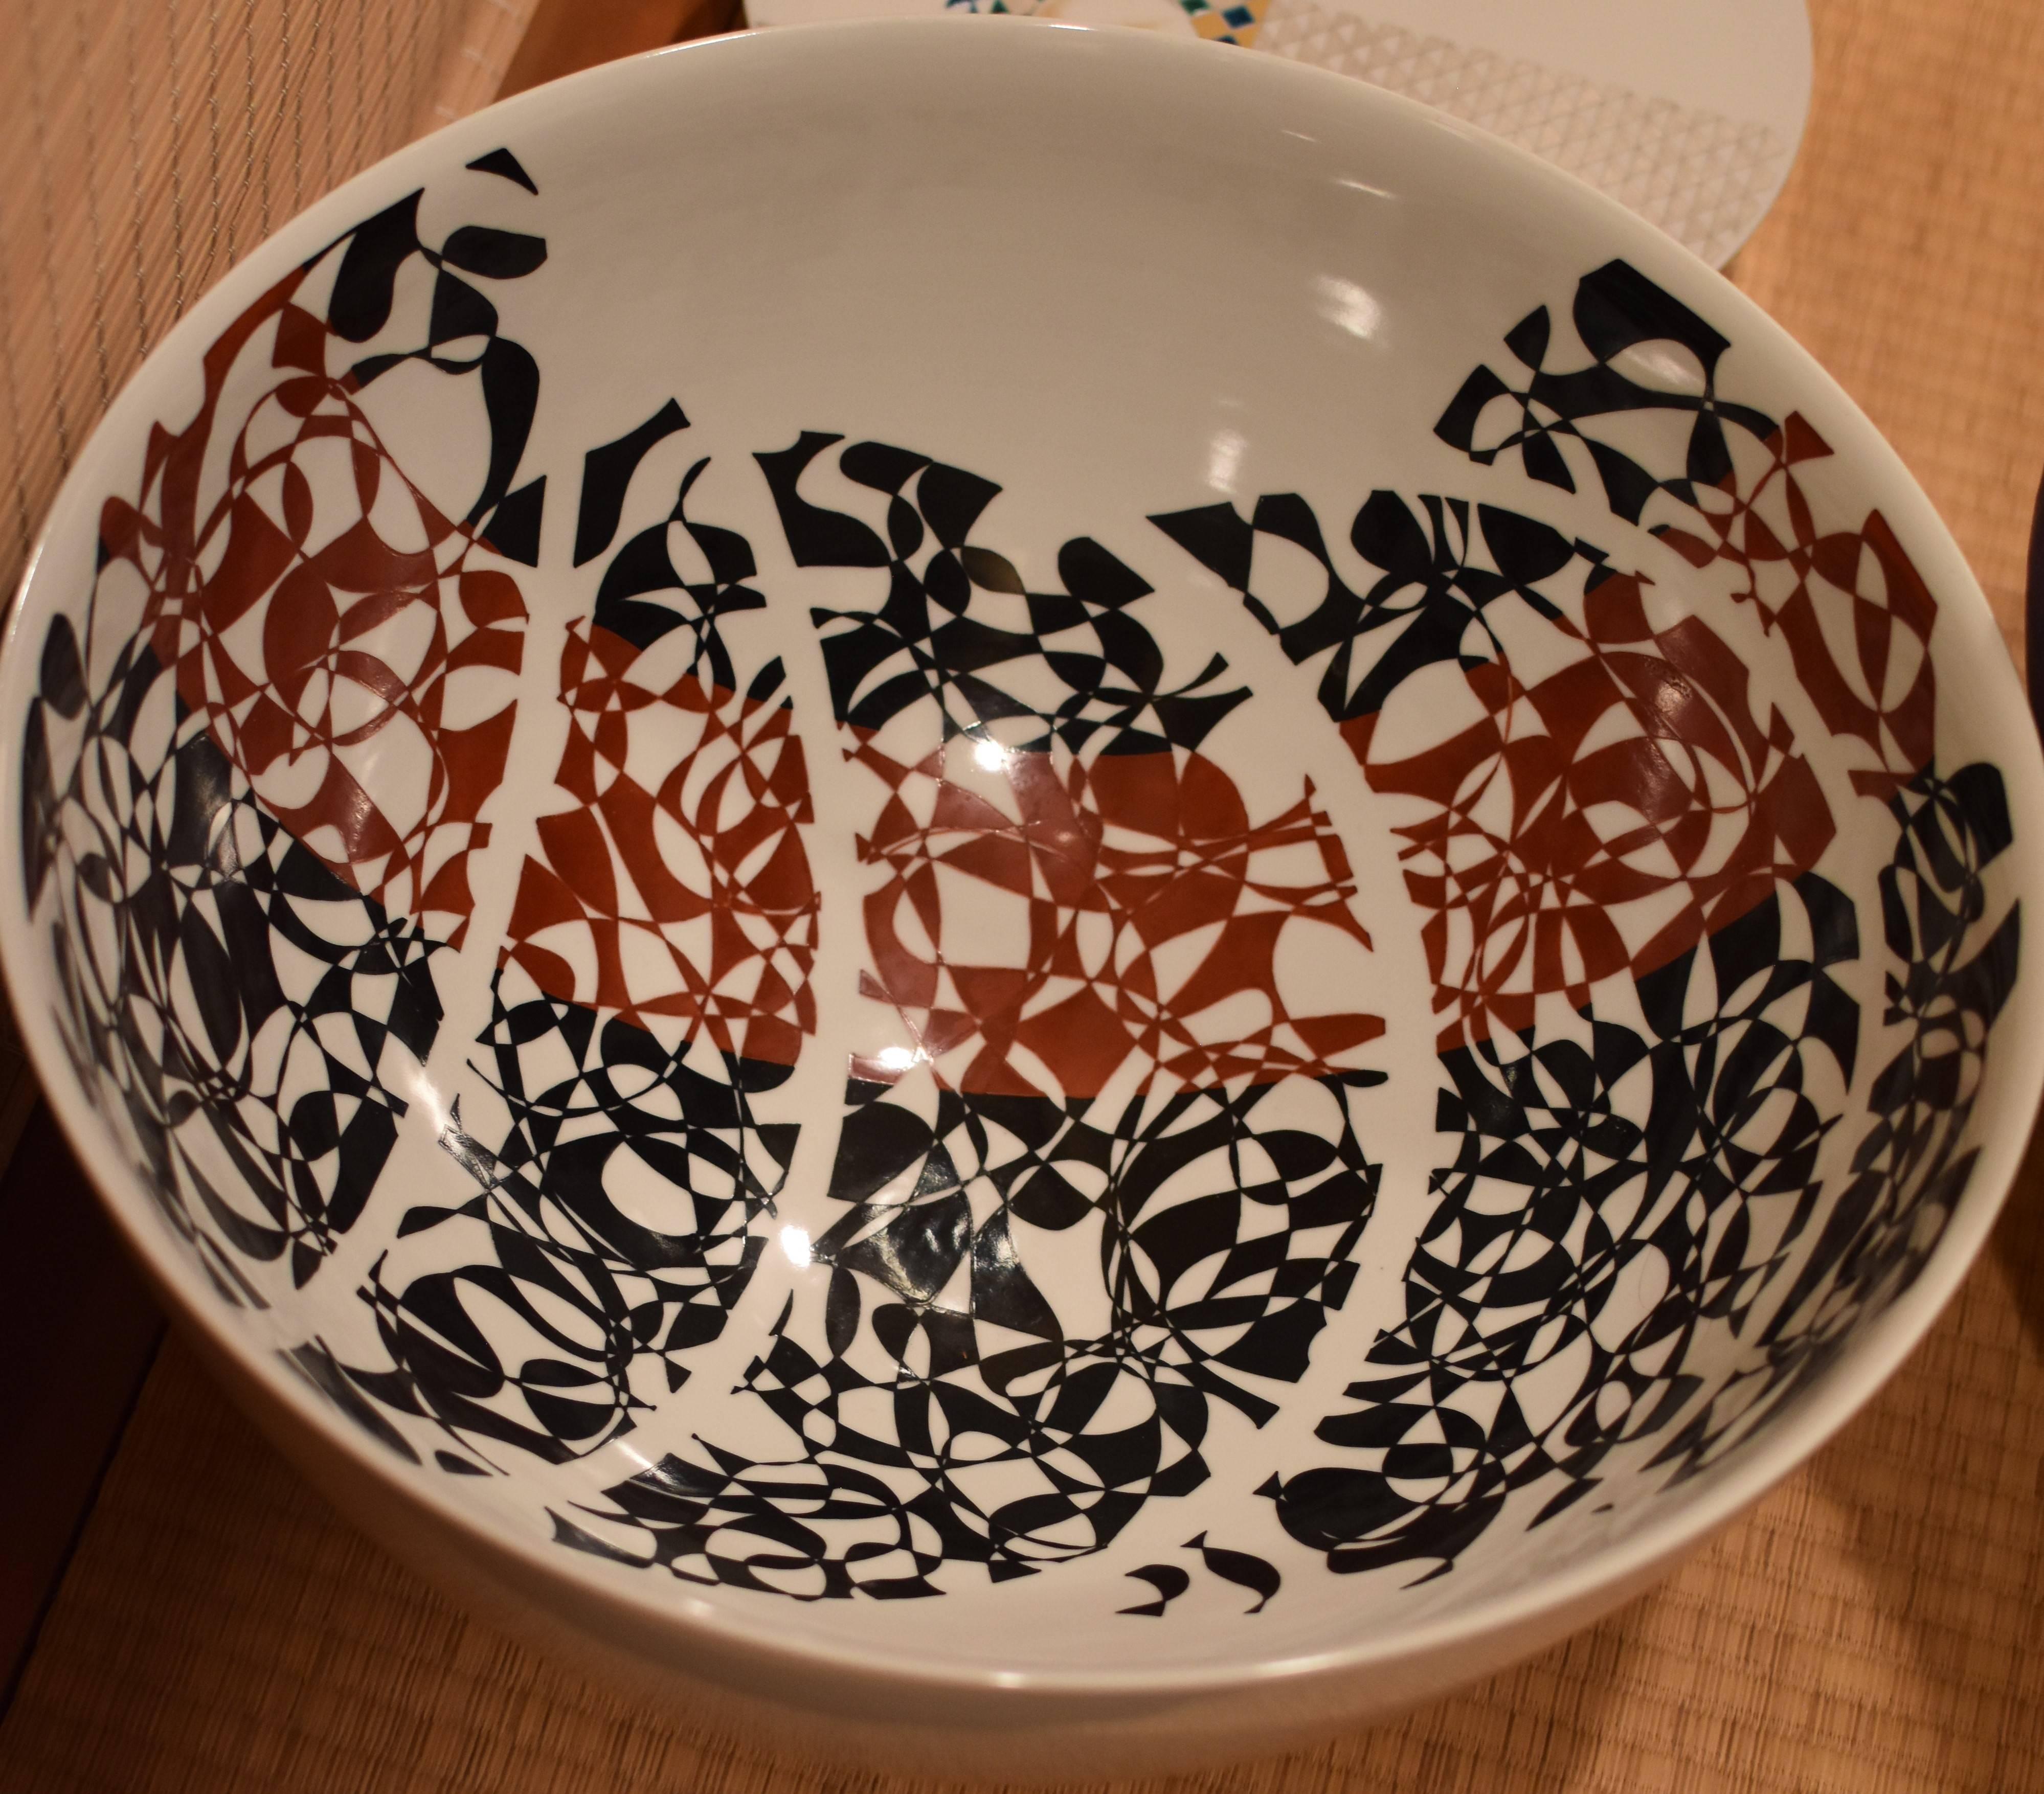 Mesmerizing museum quality very large Japanese contemporary decorative intricately hand-painted bowl/centerpiece, an award-winning exhibition piece featuring a stunning abstract pattern in black and red set against a milky white background. The